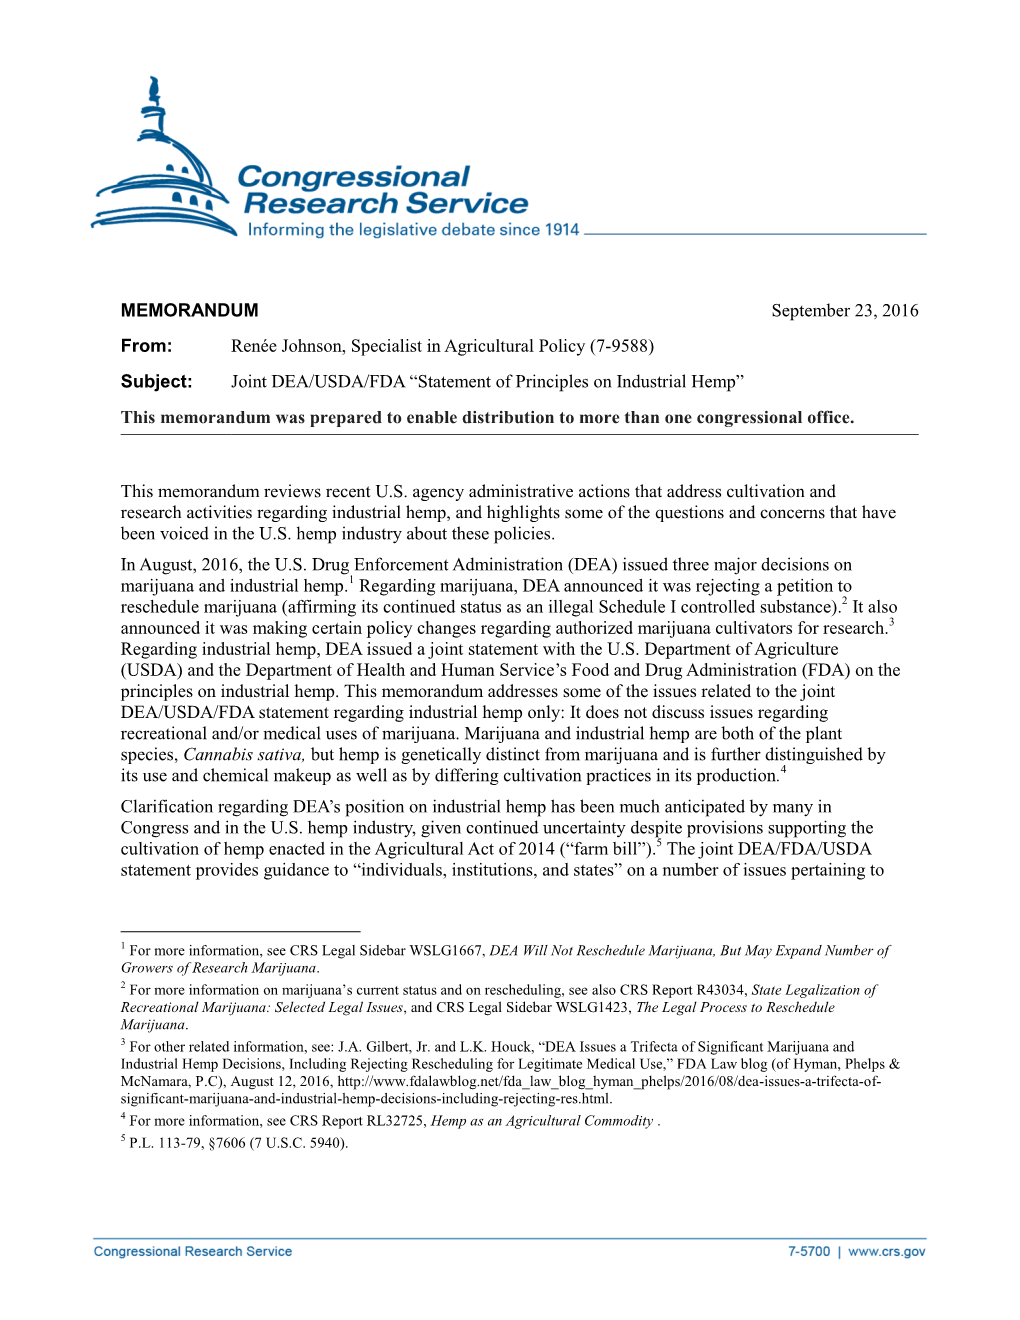 Joint DEA/USDA/FDA “Statement of Principles on Industrial Hemp” This Memorandum Was Prepared to Enable Distribution to More Than One Congressional Office